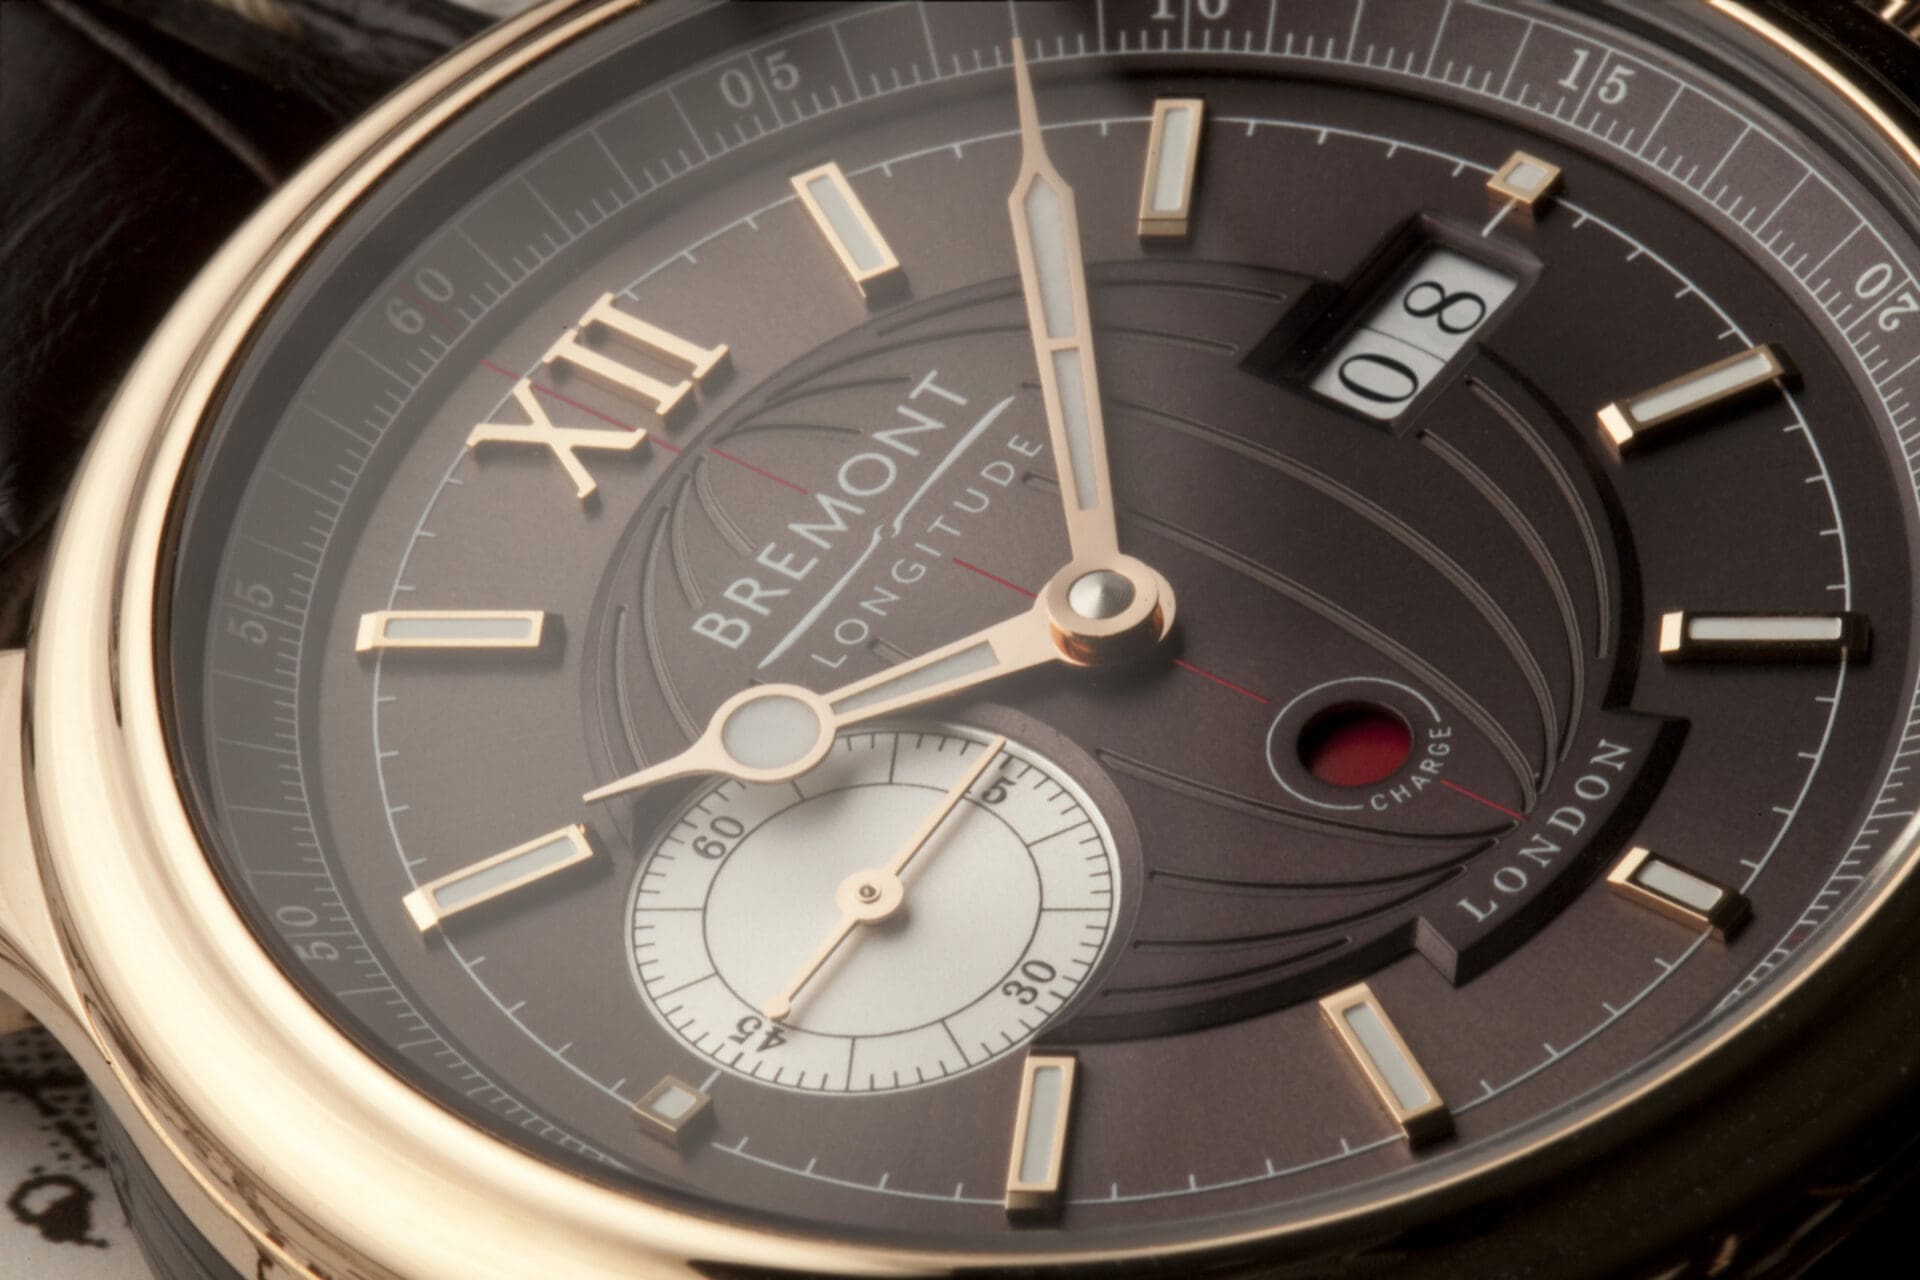 INTRODUCING: With its first movement, the Bremont Longitude is a statement of bold intent